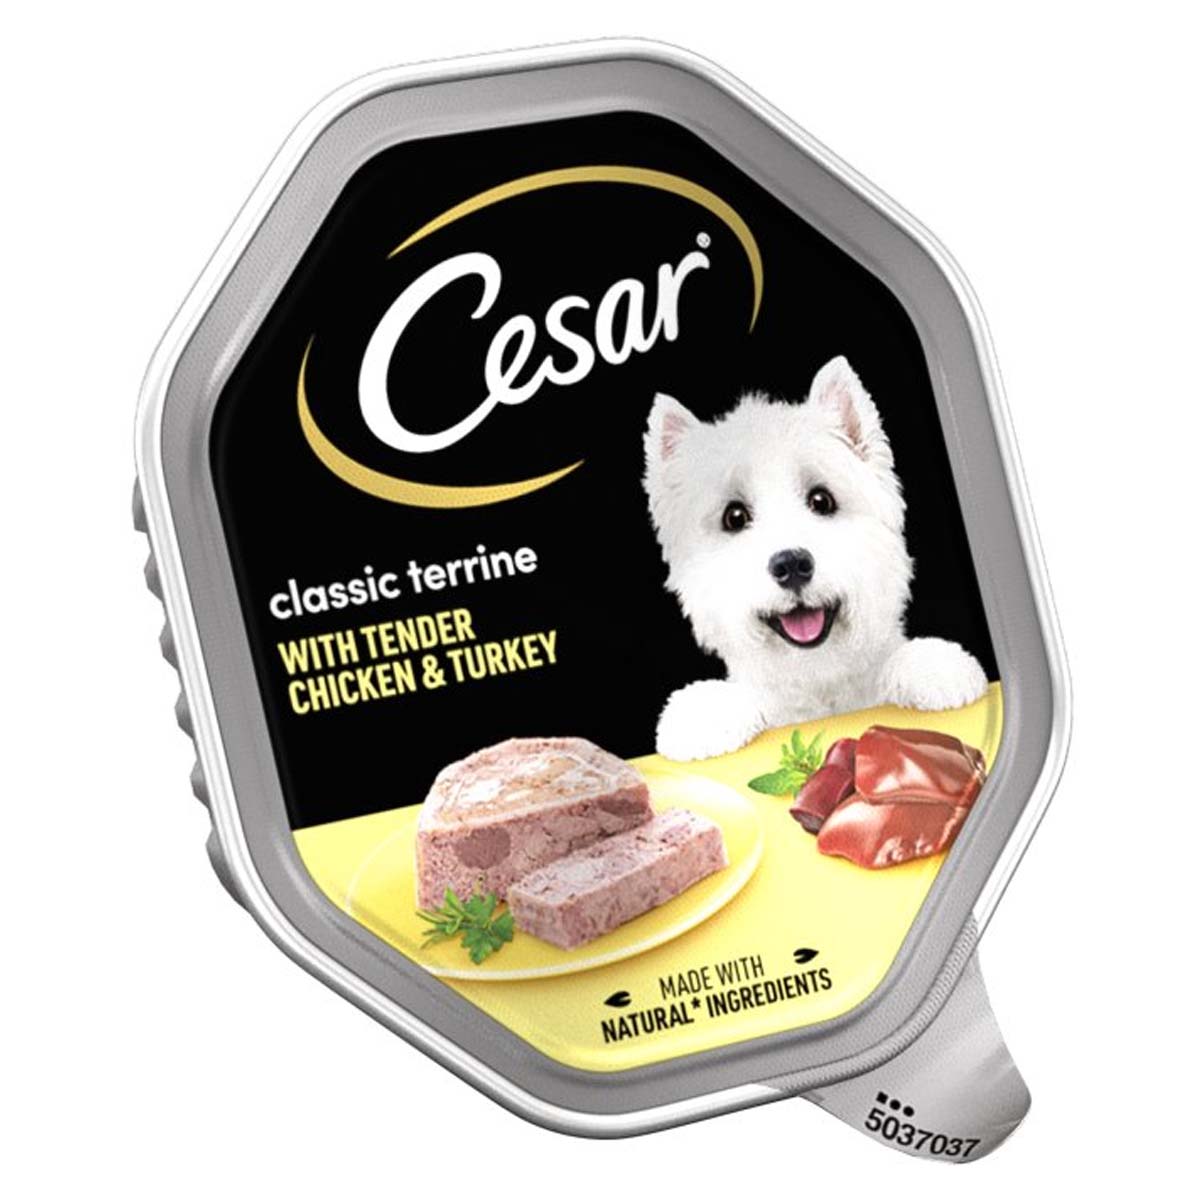 Cesar - Classic Terrine Dog Food Tray Chicken & Turkey in Loaf - 150g - Continental Food Store